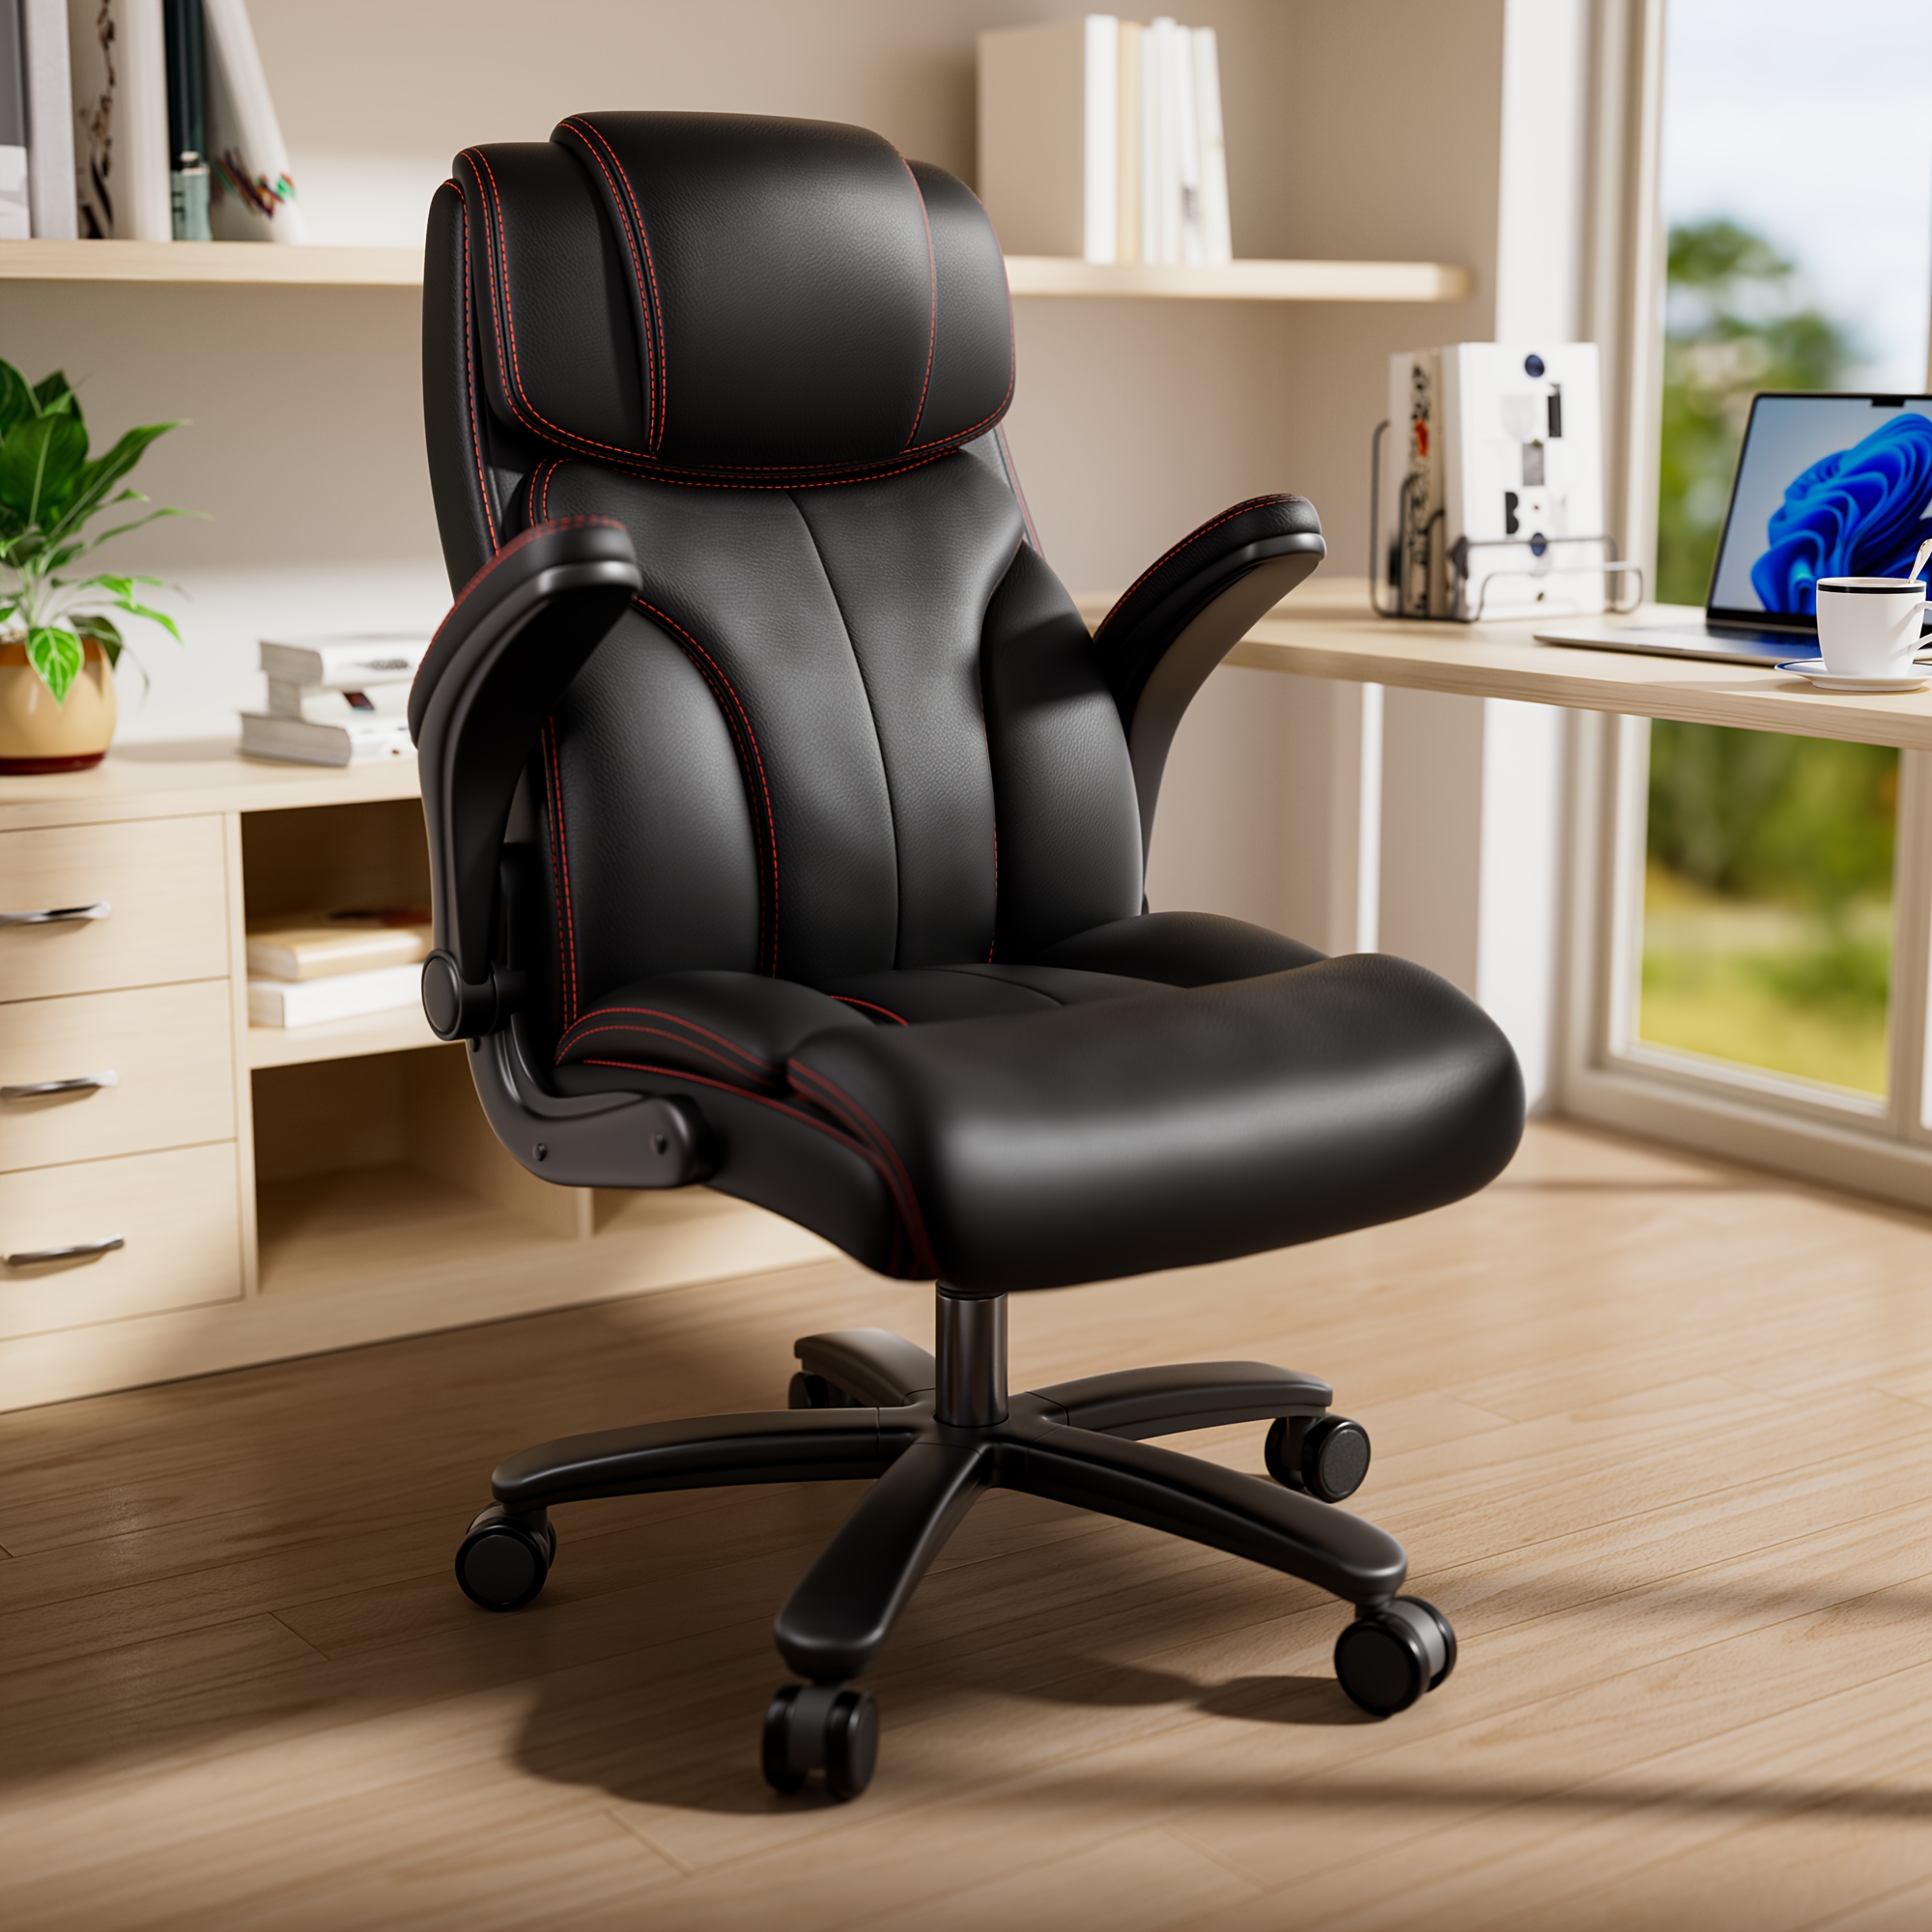 

Executive Desk Chair, Big And Tall Home Office Chairs For Heavy People 400lbs Wide Seat, High Back Large Executive Office Chair With Adjustable Flip Up Arms, Black Pu Leather Computer Desk Chair